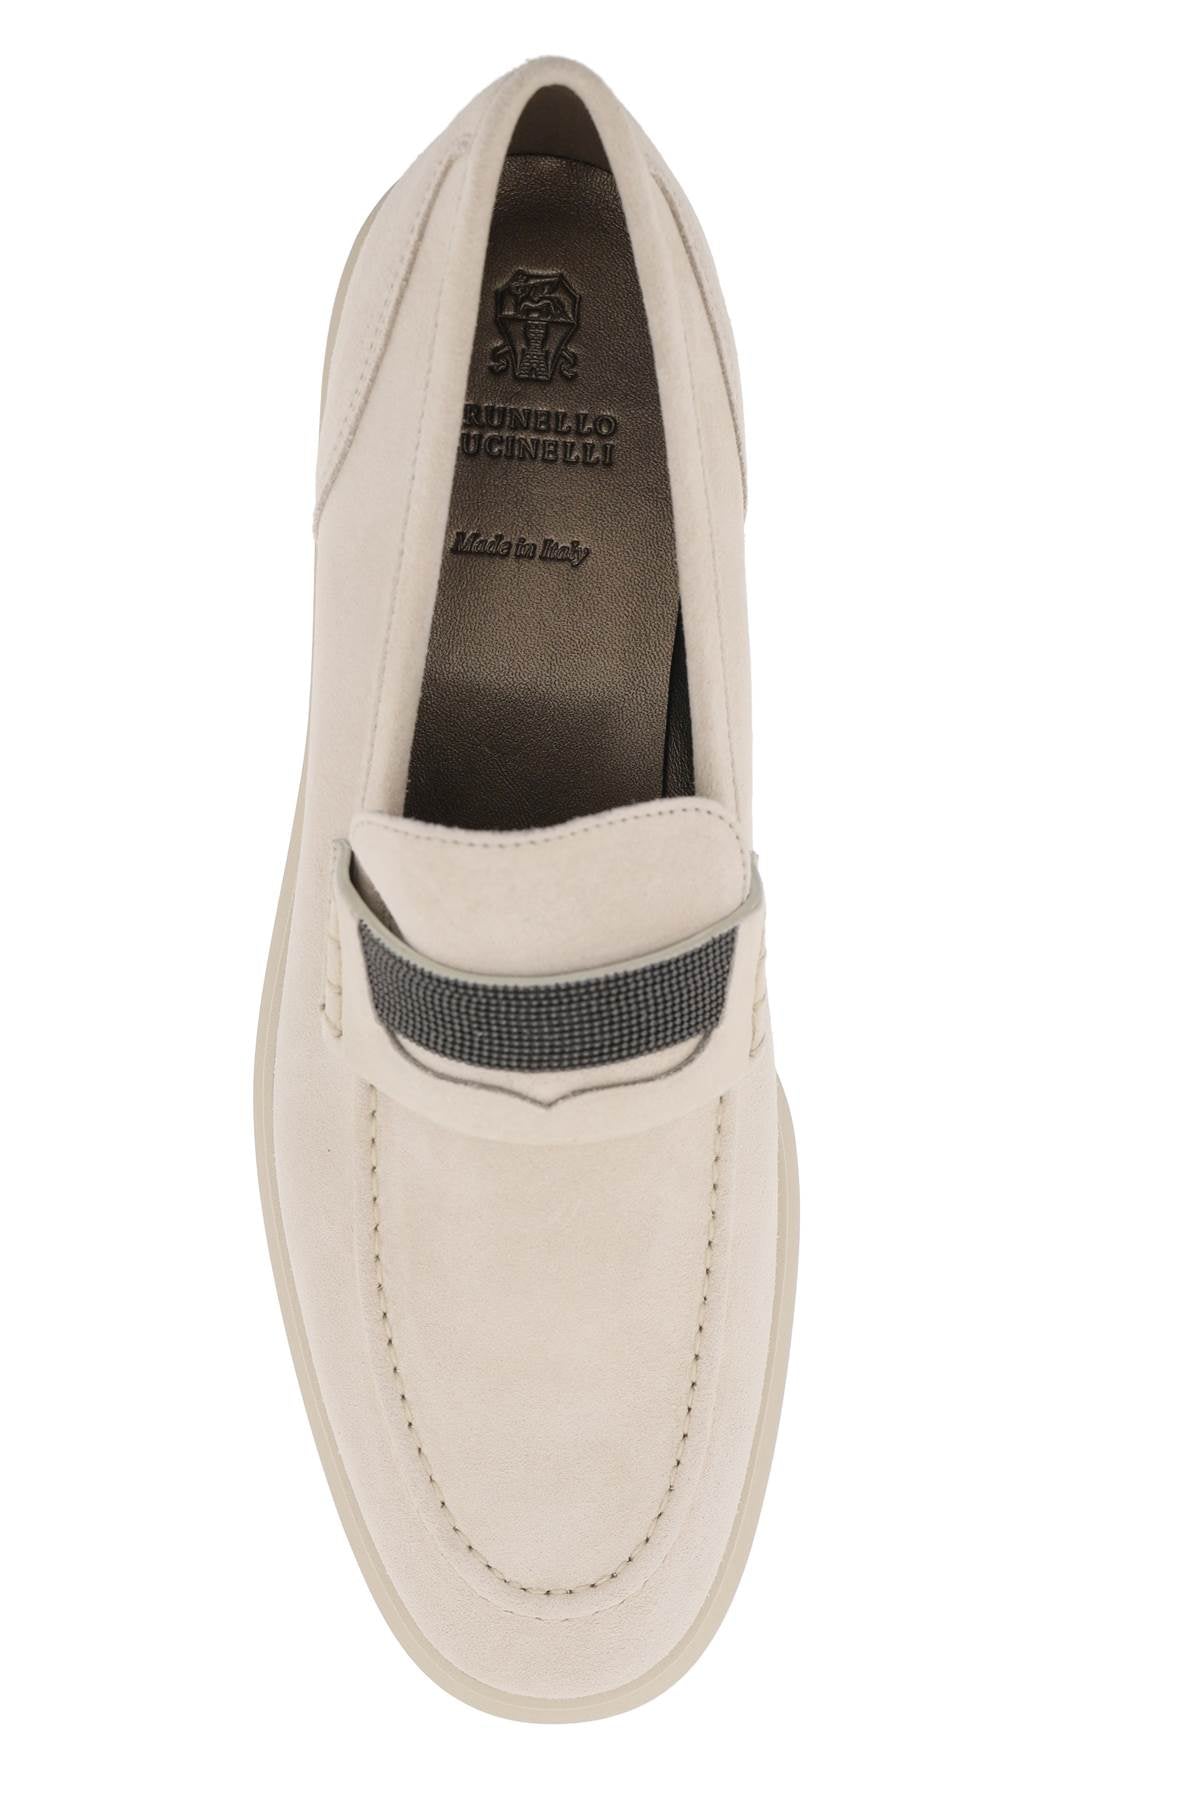 BRUNELLO CUCINELLI Luxury Suede Penny Loafer with Jewellery - White